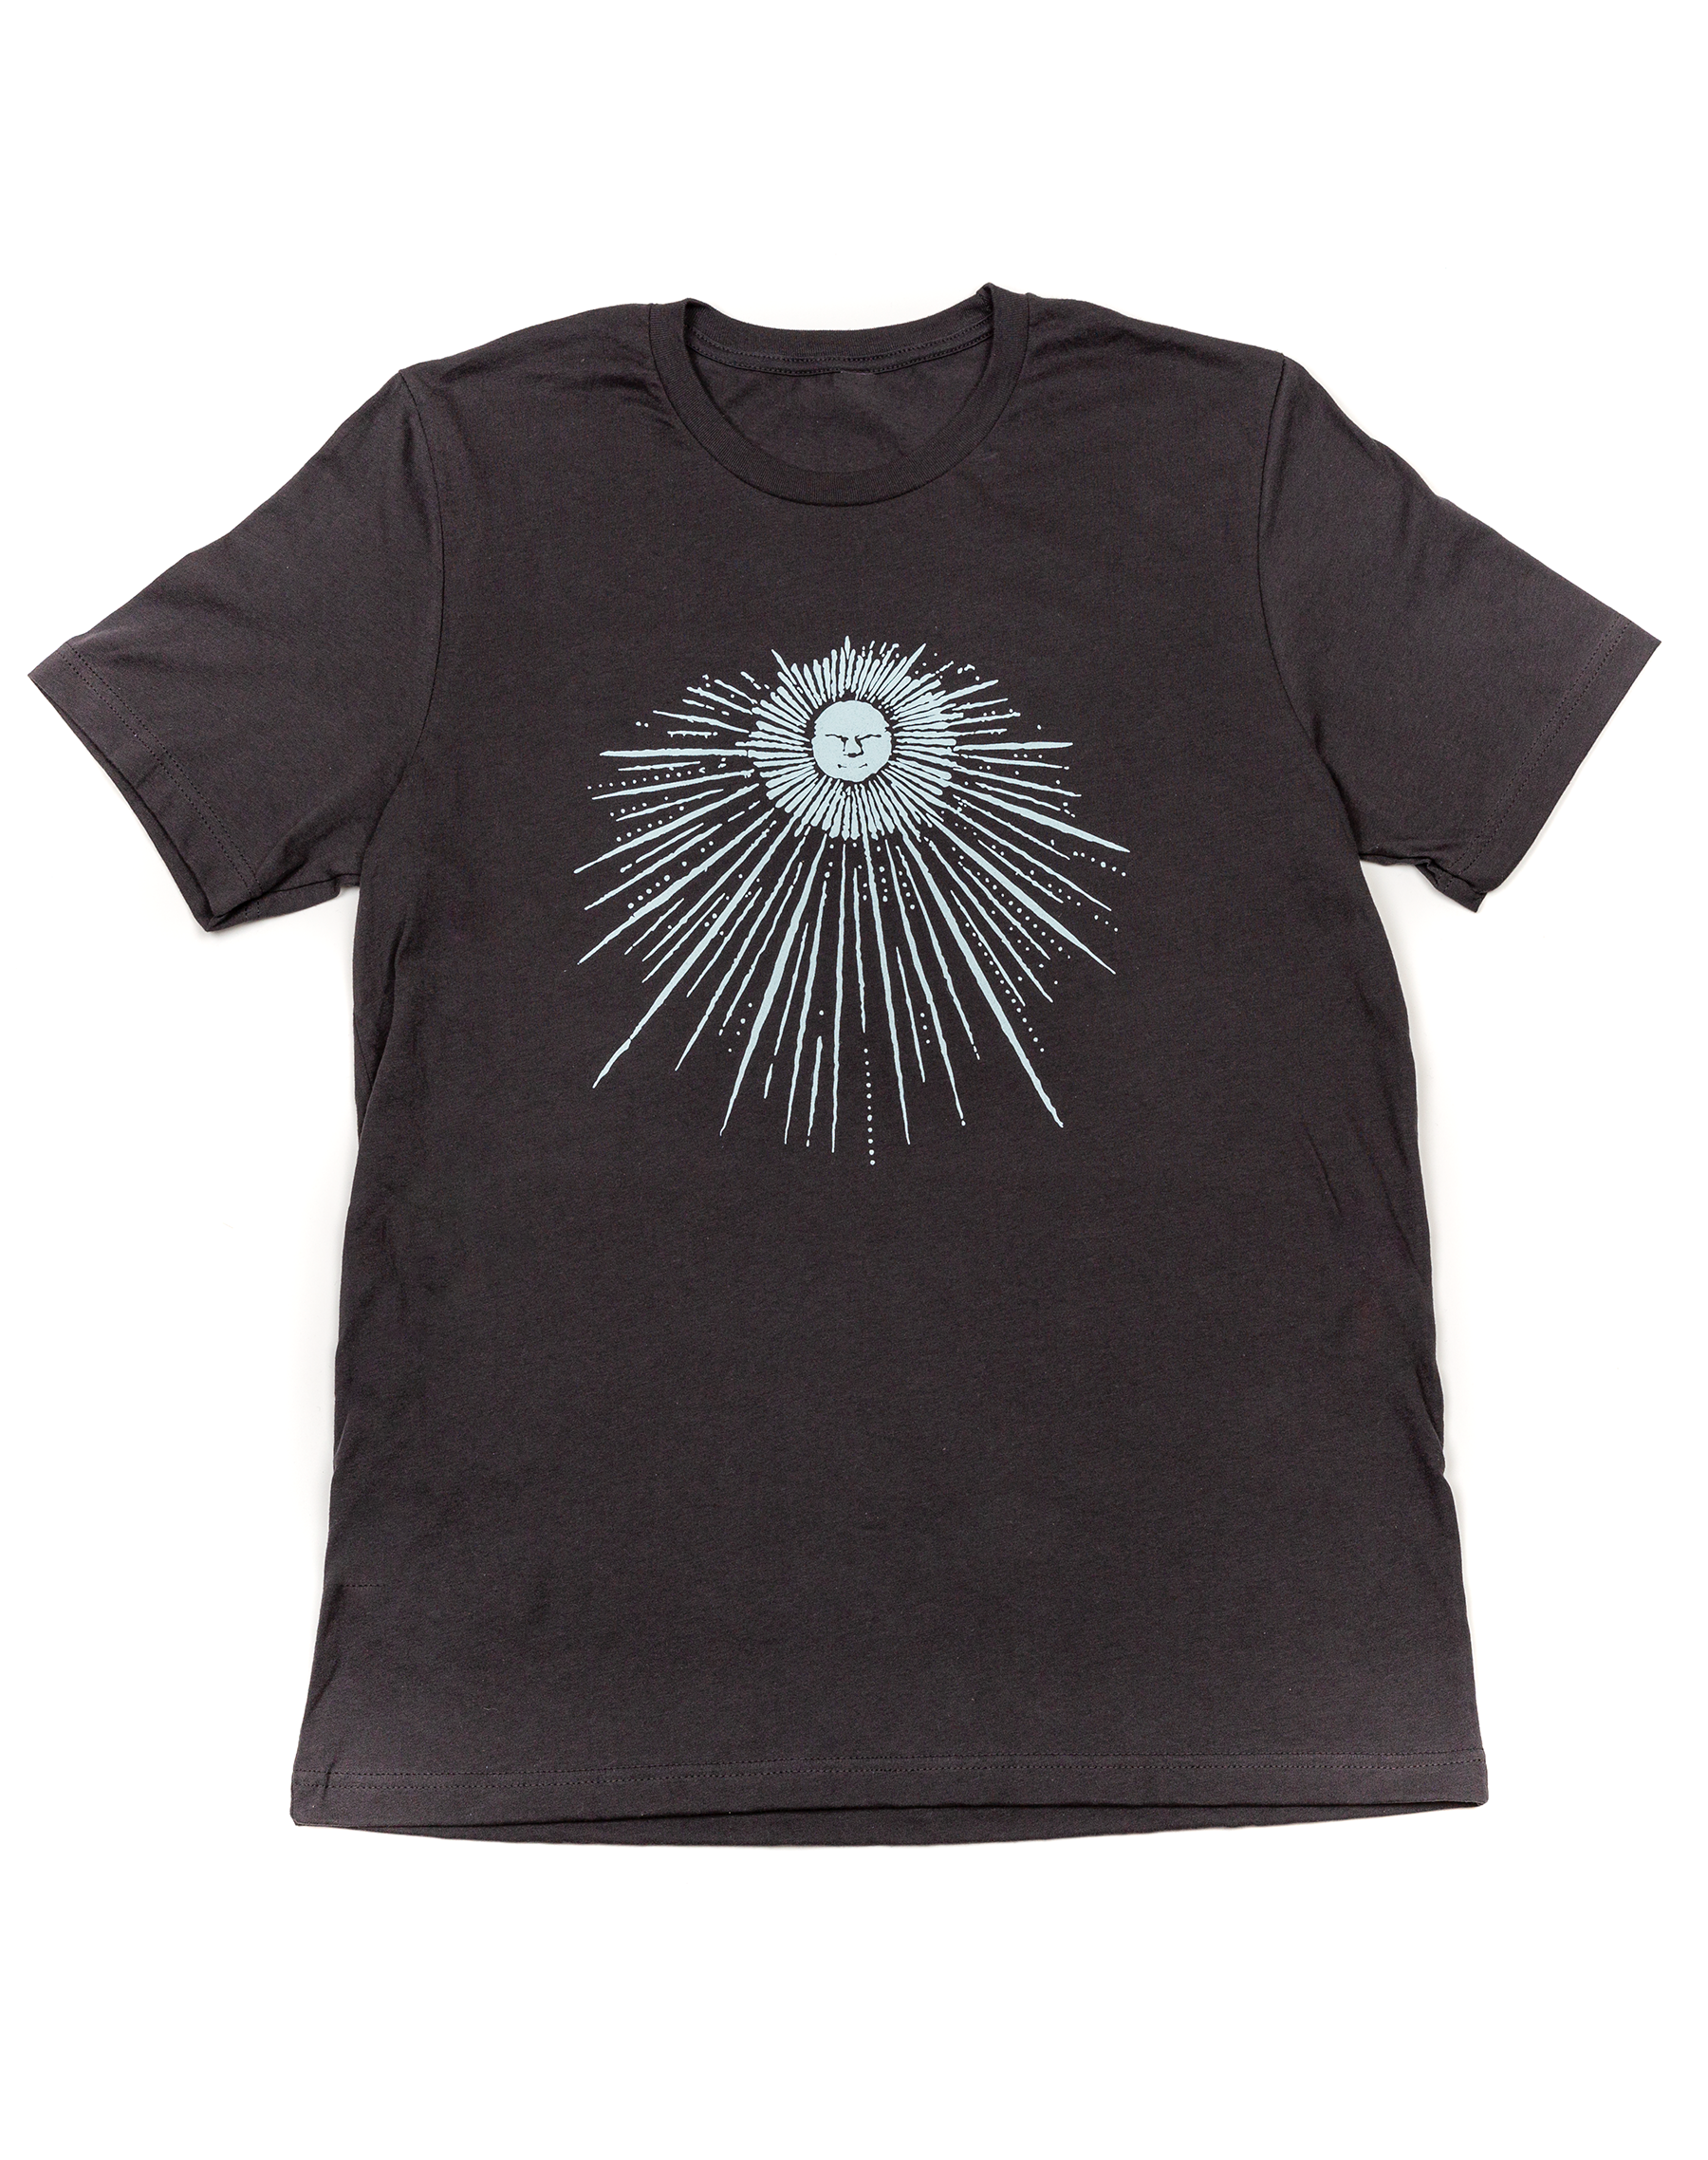 A black t-shirt with a sunburst with a face in it